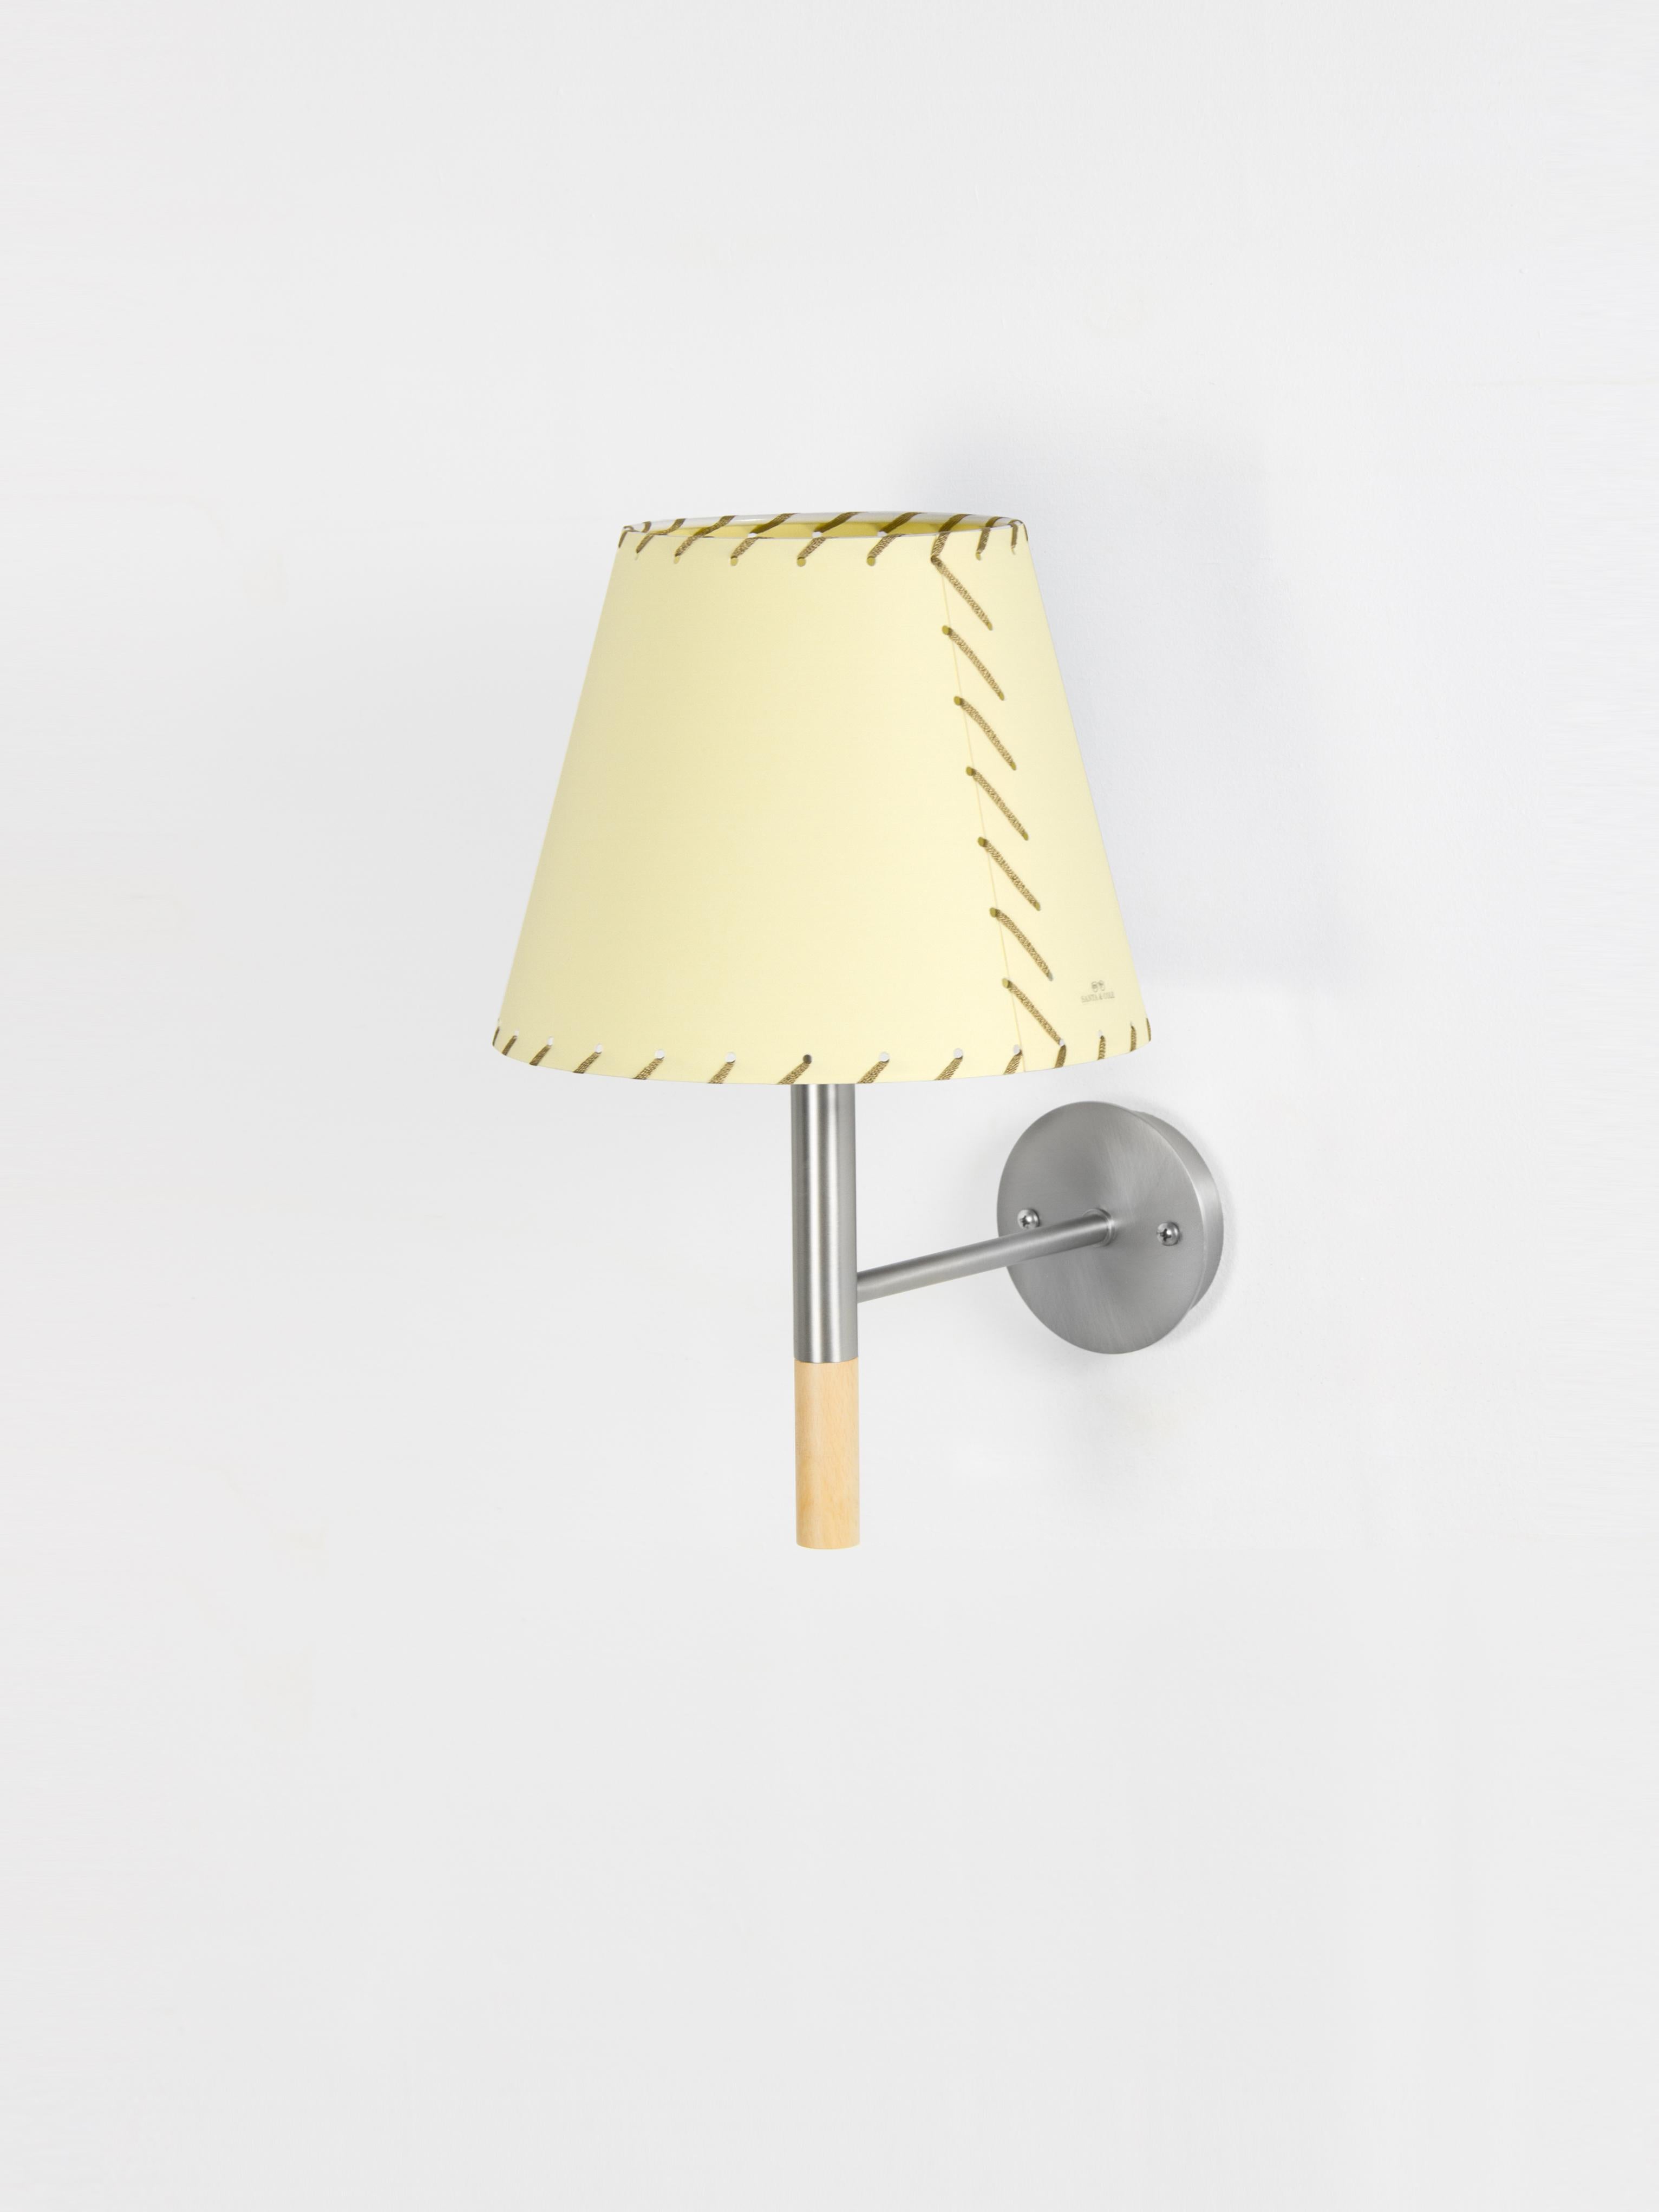 Beige BC2 wall lamp by Santa & Cole
Dimensions: D 20 x W 26 x H 33 cm
Materials: Metal, beech wood, stitched parchment.

The BC1, BC2 and BC3 wall lamps are the epitome of sturdy construction, aesthetic sobriety and functional quality. Their